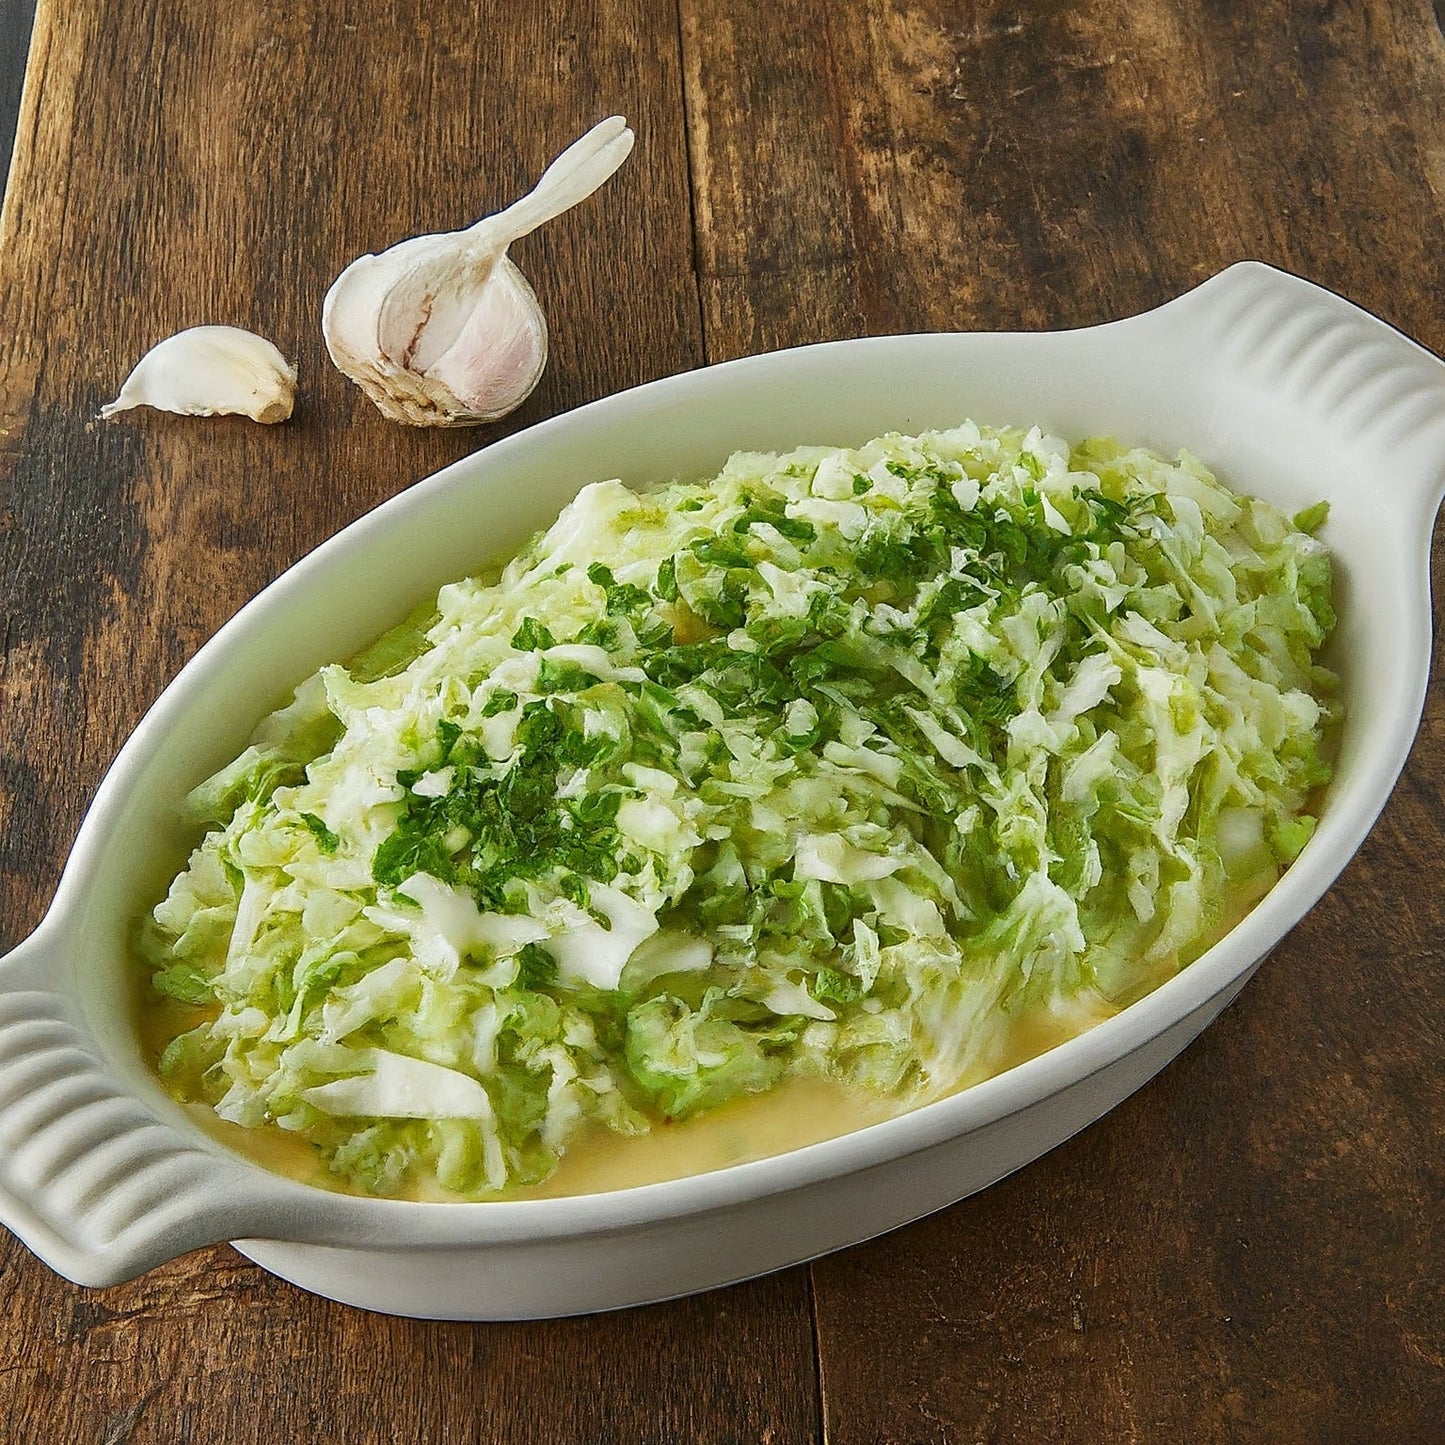 A VEGAN DECADENCE FOR YOUR EASTER HOLIDAY: BUTTER-BRAISED CABBAGE WITH CREAM AND GARLIC